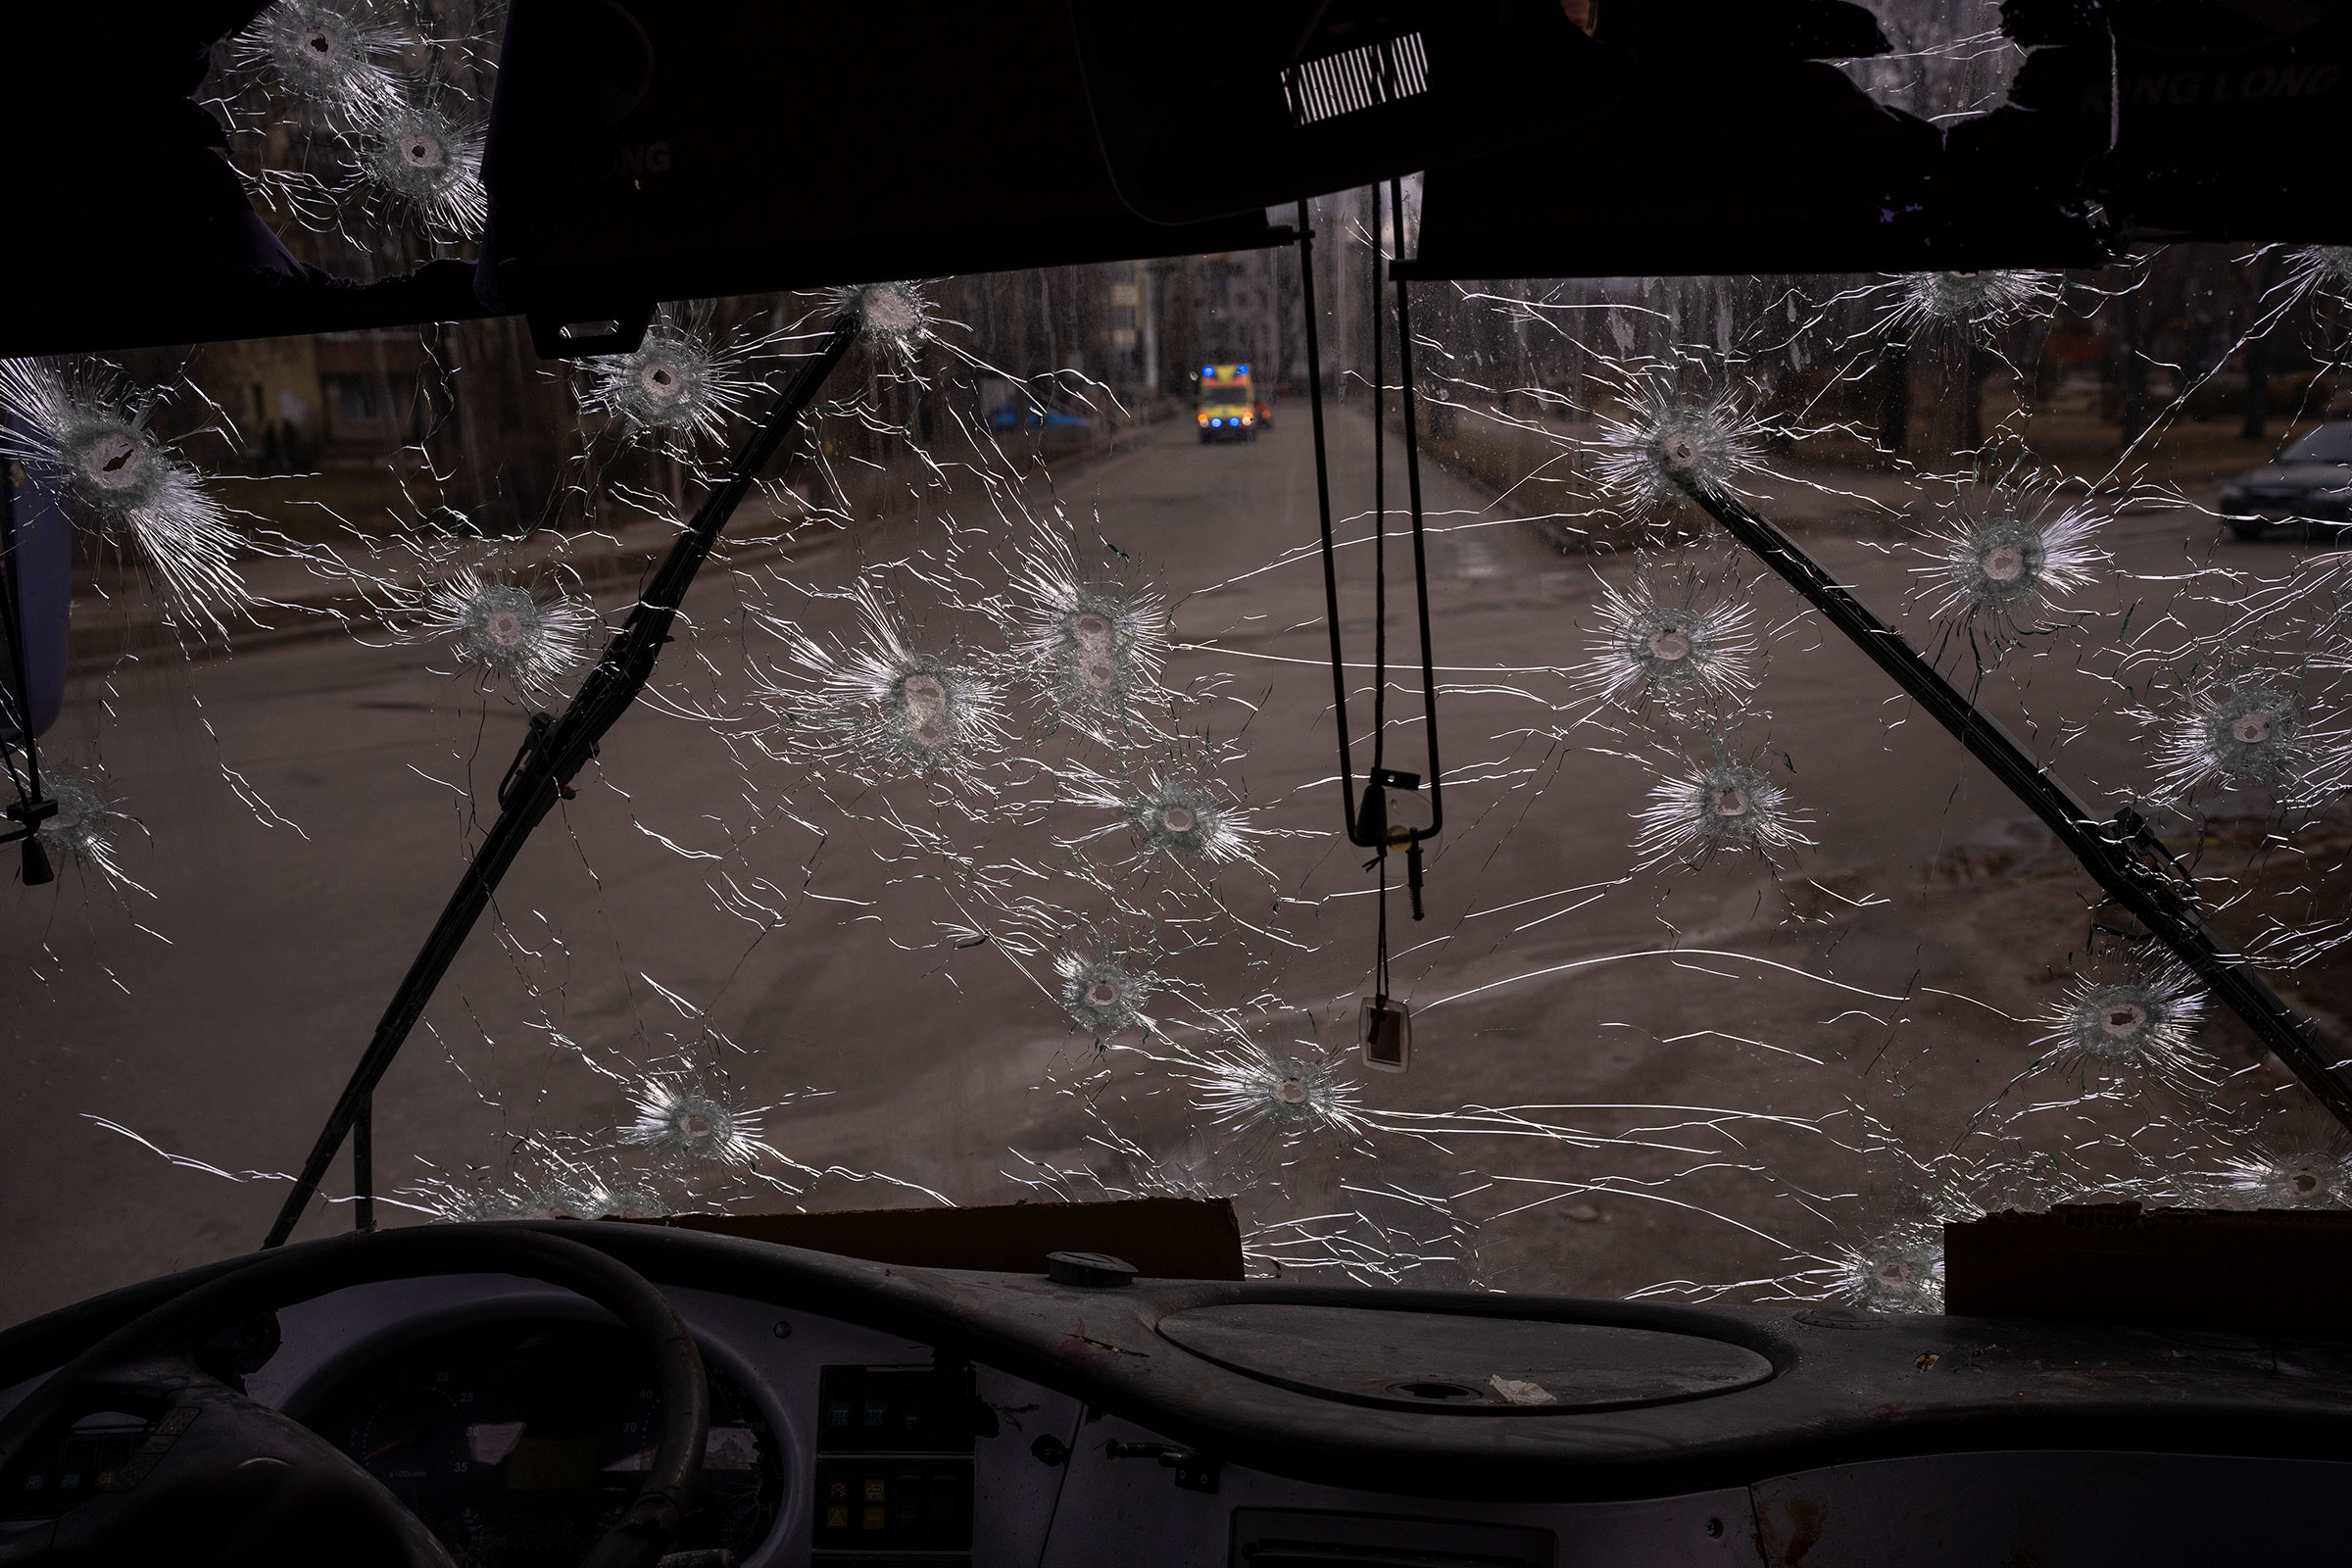 A machine-gunned bus is photographed after an ambush in the city of Kyiv on March 4.